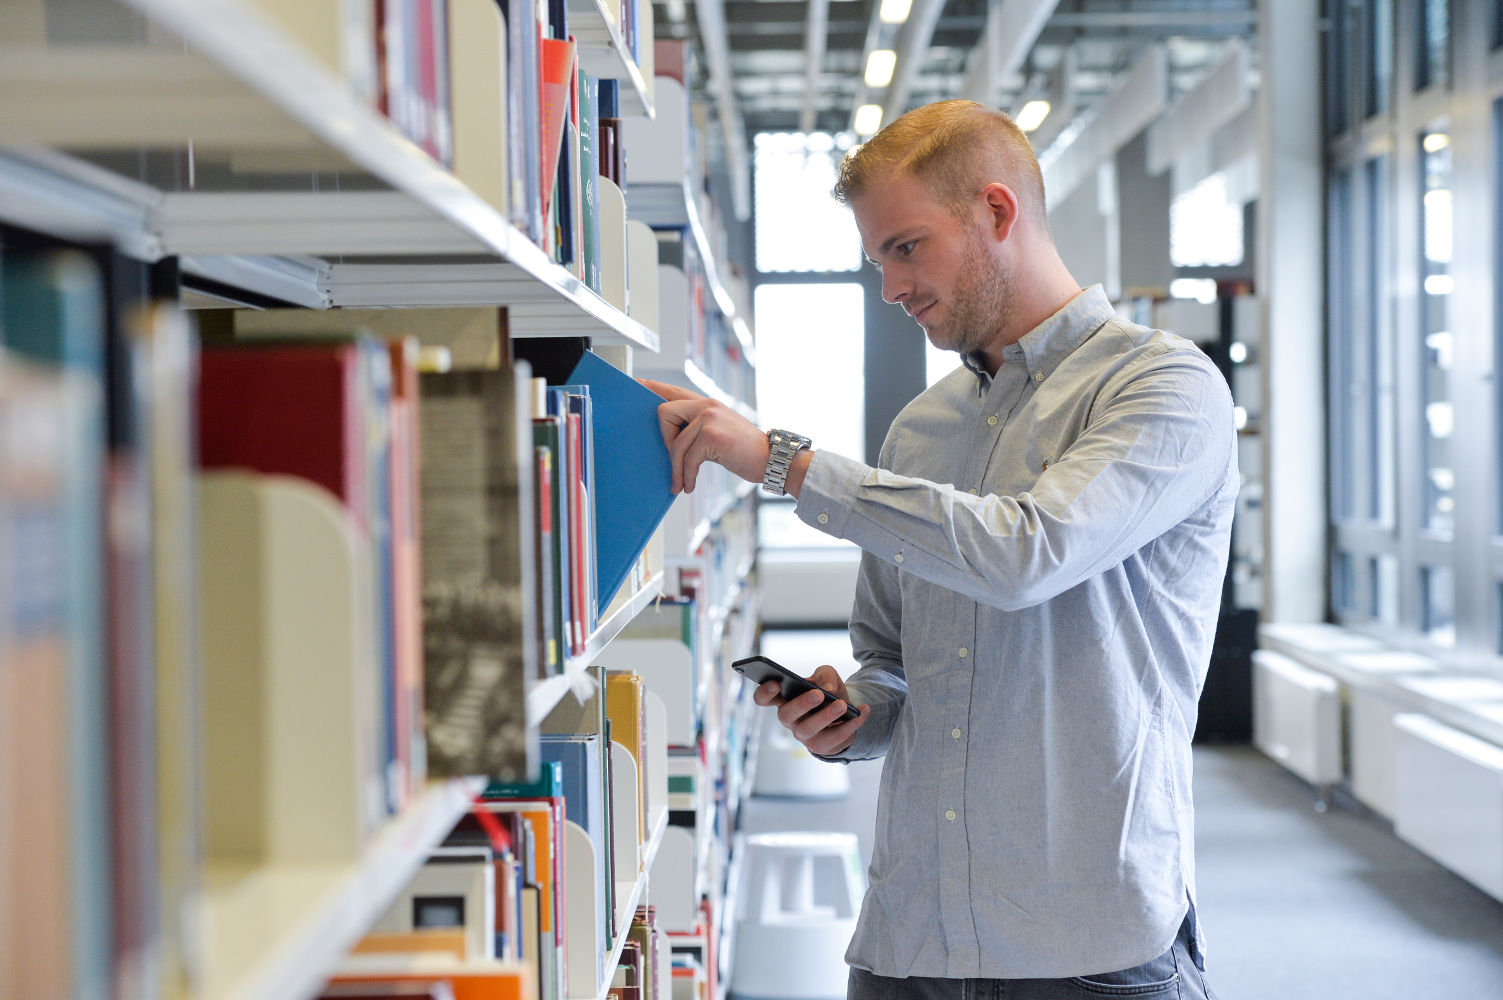 Person at the bookshelf with smartphone in hand